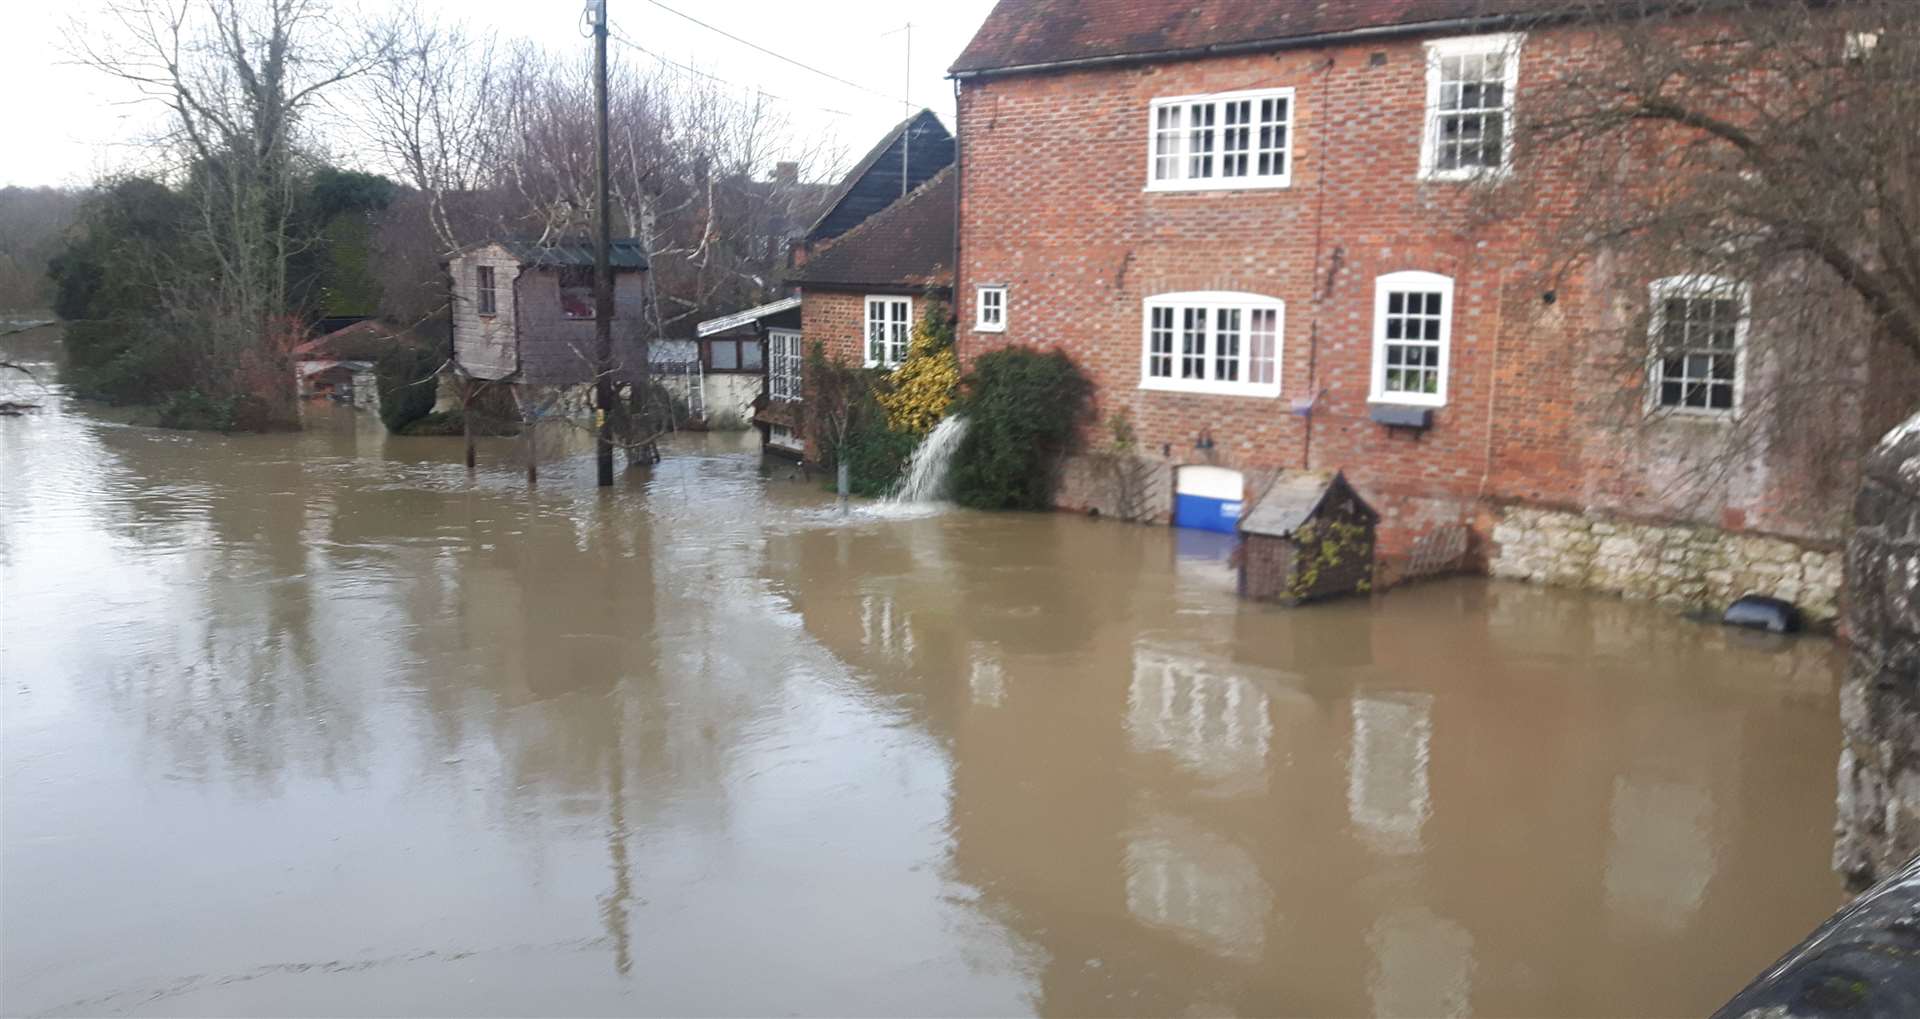 The River Beult has flooded homes